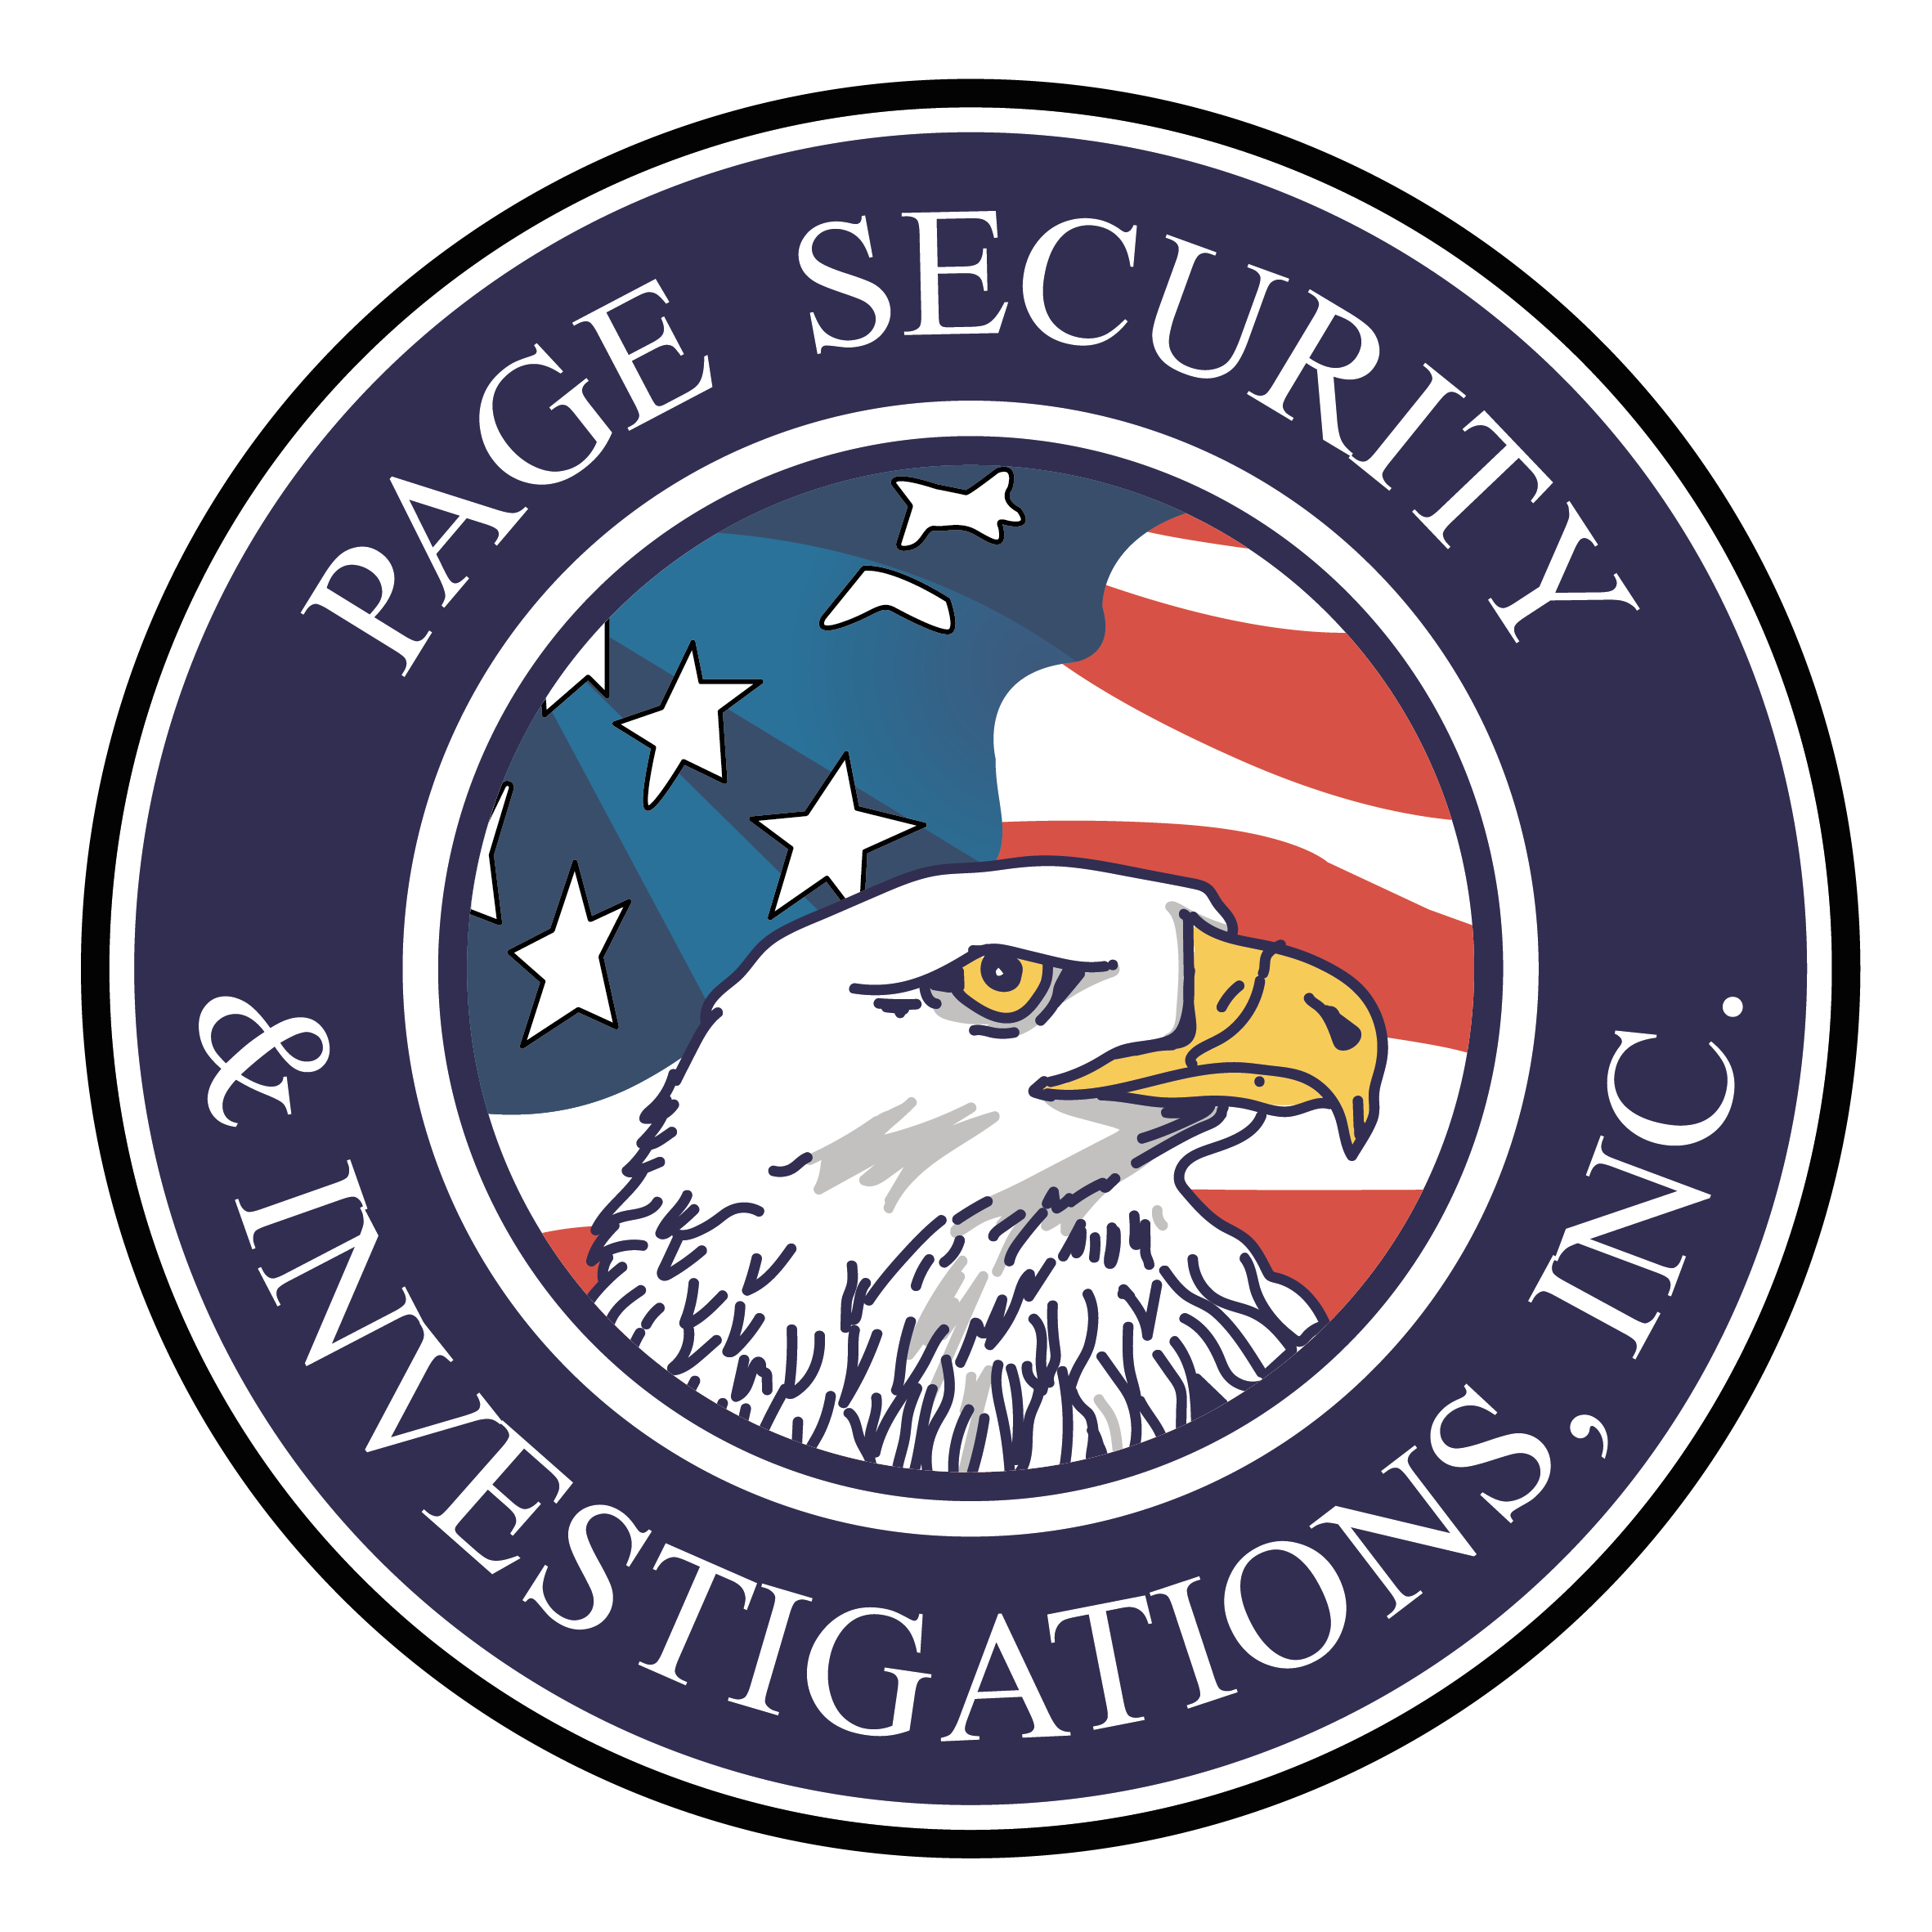 Page Security &amp; Investigations, Inc. | Trusted Security Professionals